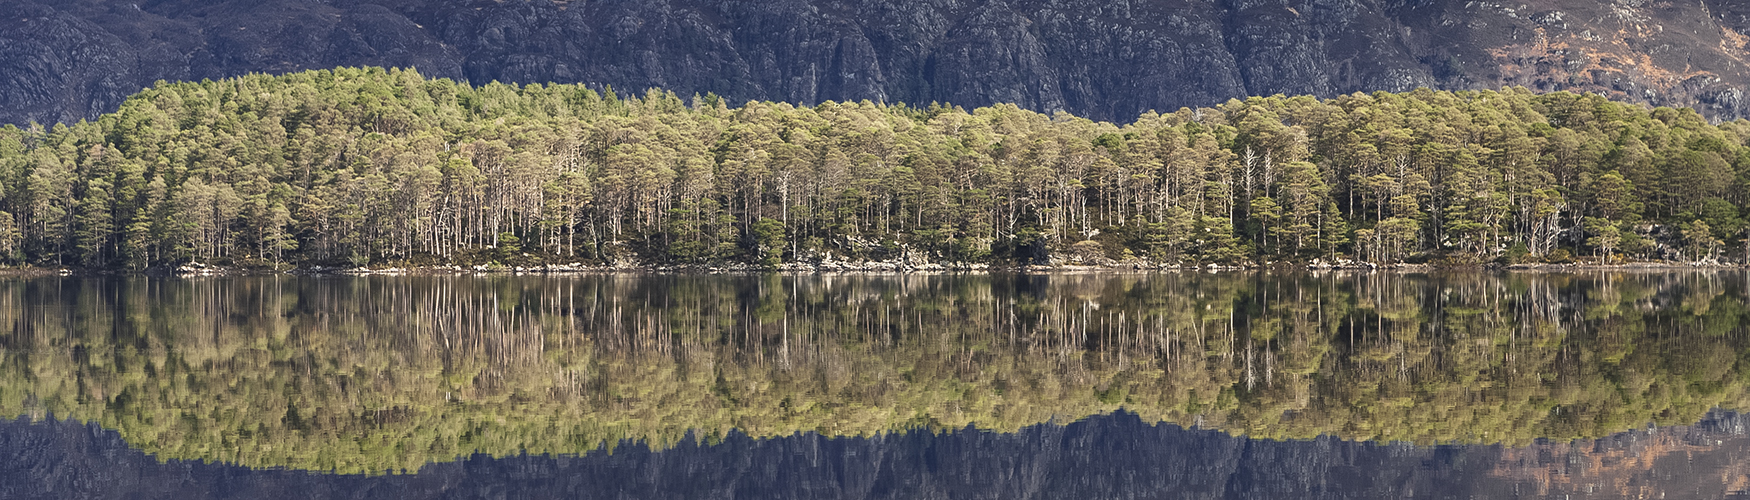 Scots pine reflected on Loch Maree